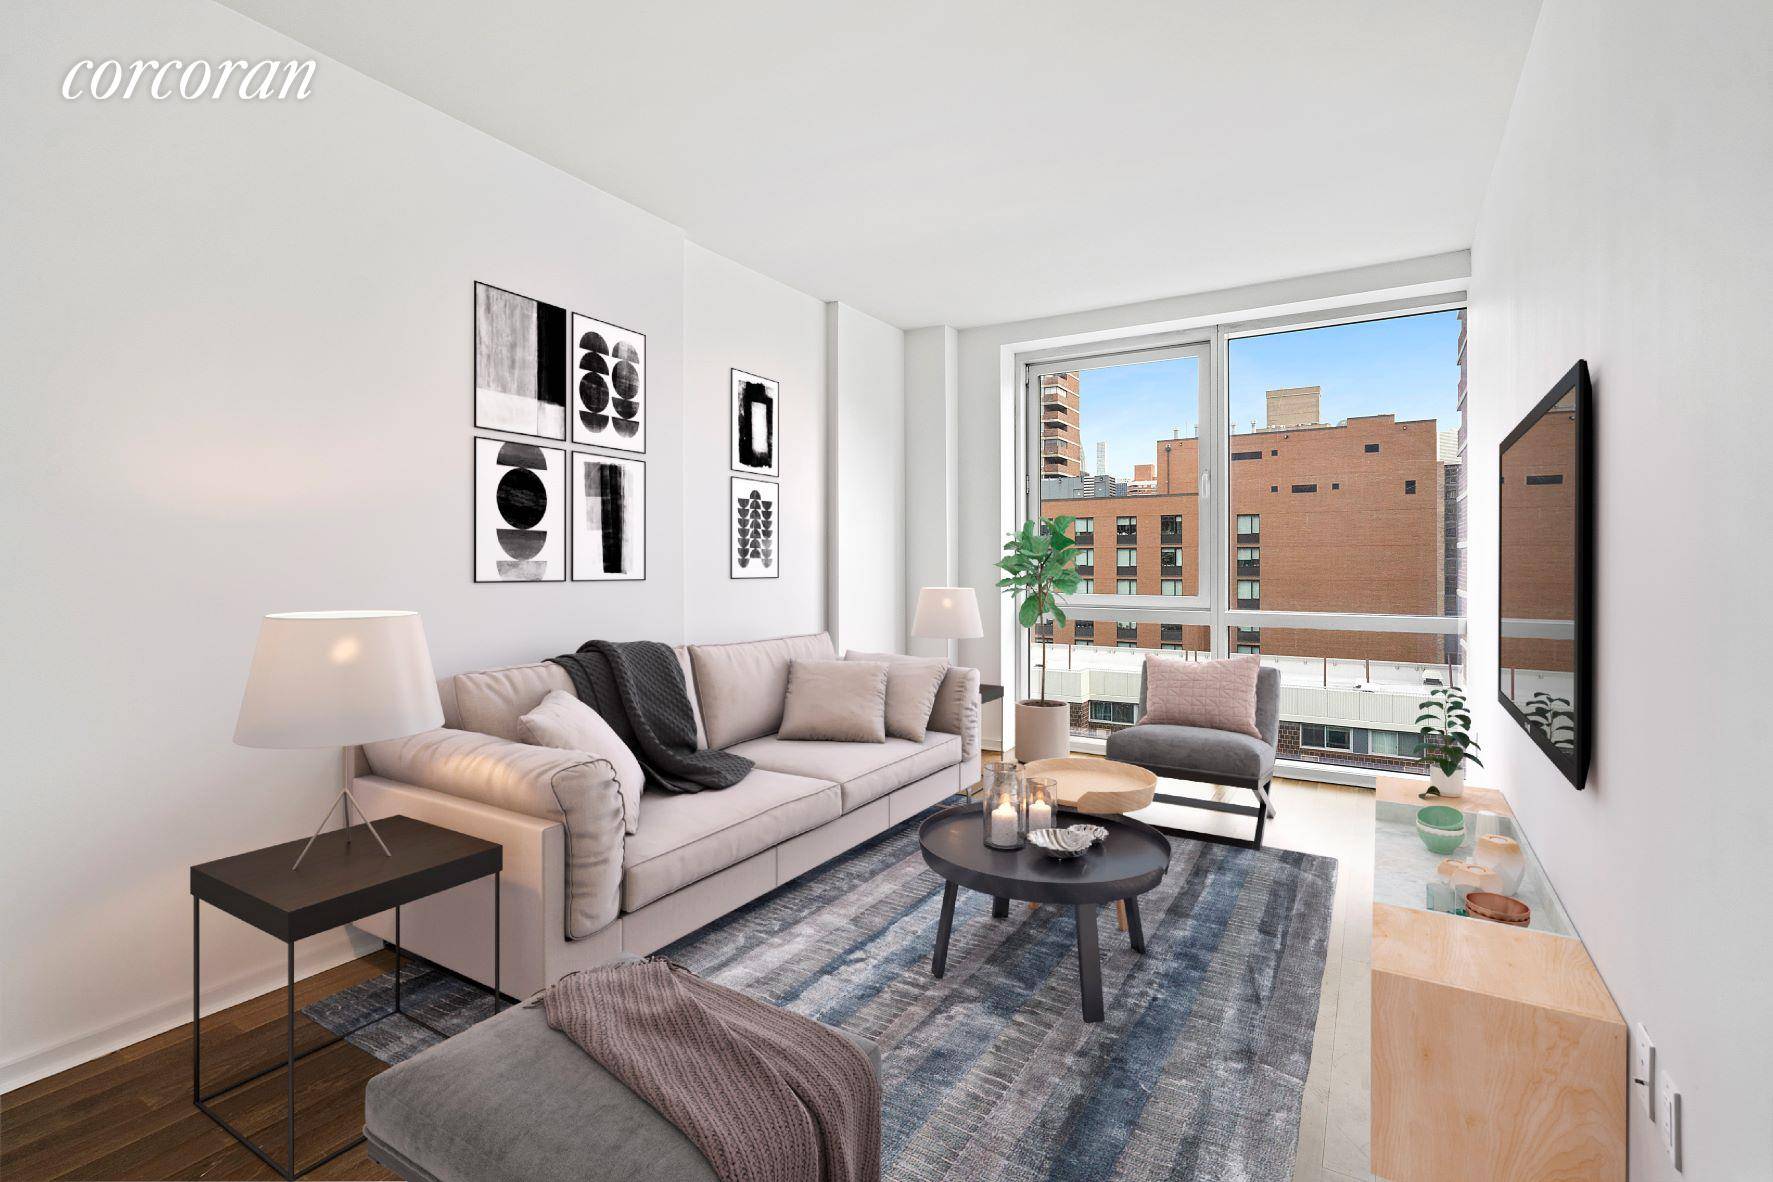 Welcome home to beautiful apartment 14L at Gramercy Starck Condominiums, conveniently located at 340 East 23rd Street.